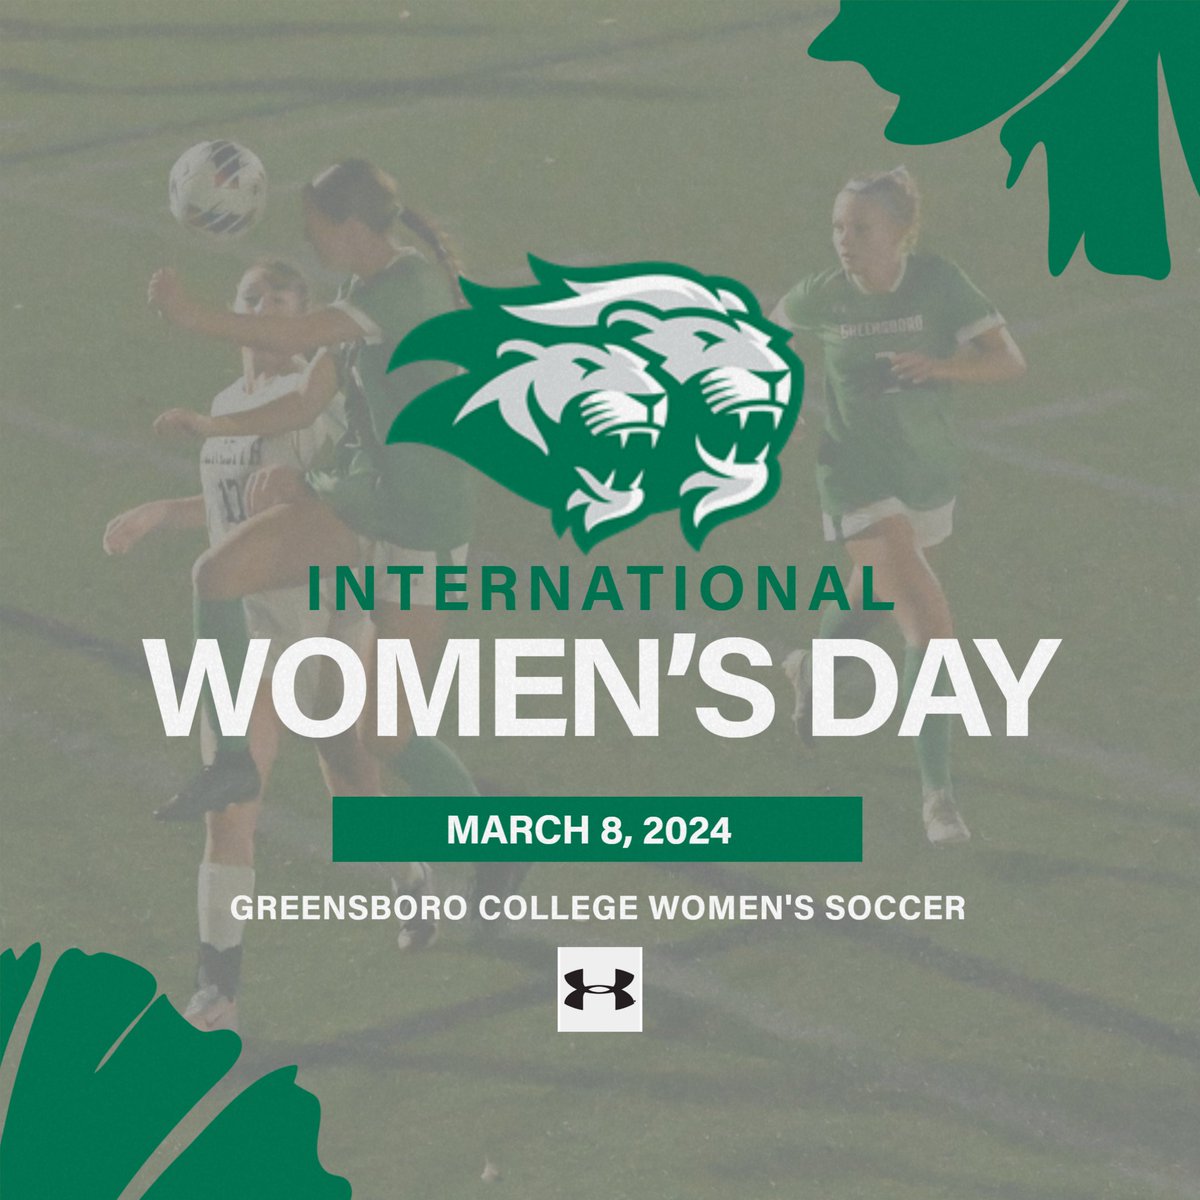 Today we celebrate International Women's Day and all the remarkable young ladies we are fortunate enough to have in our program! You all are fantastic role-models to all of those in our community. Keep up the great work! @GC_Pride @Gboro_College #weareonepride